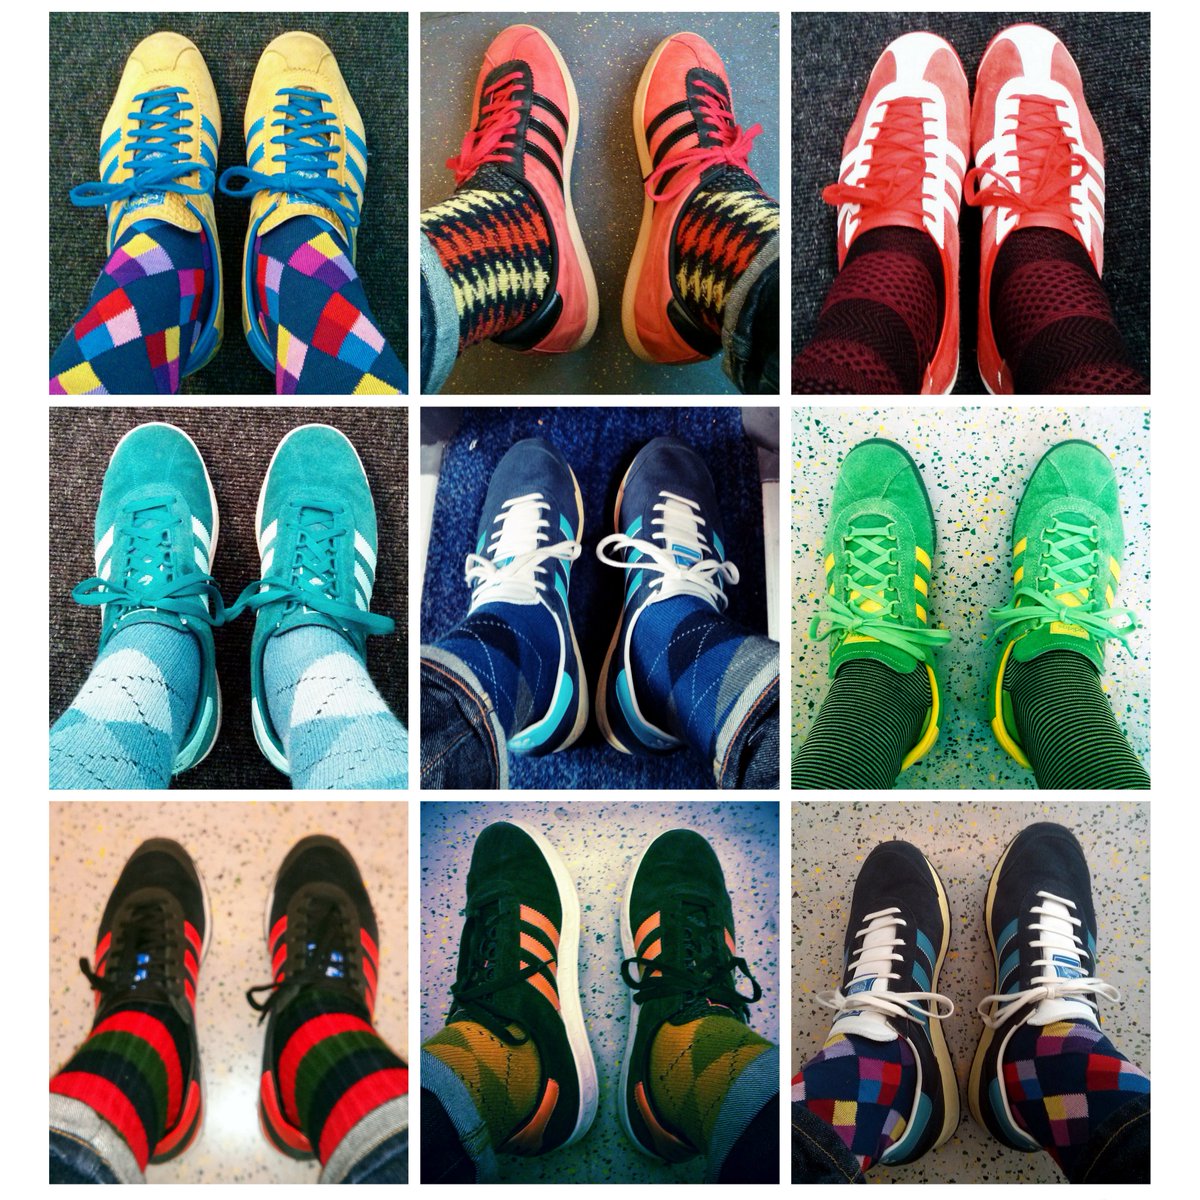 Published last year in Critical Studies in Men's Fashion, you can now download the accepted author manuscript for my paper, A casual obsession: Inside the British Sock Fetish Council.
shorturl.at/ckIW6

#3stripes #adifamily #bsfc #awaydays #casual #casualclobber #socks